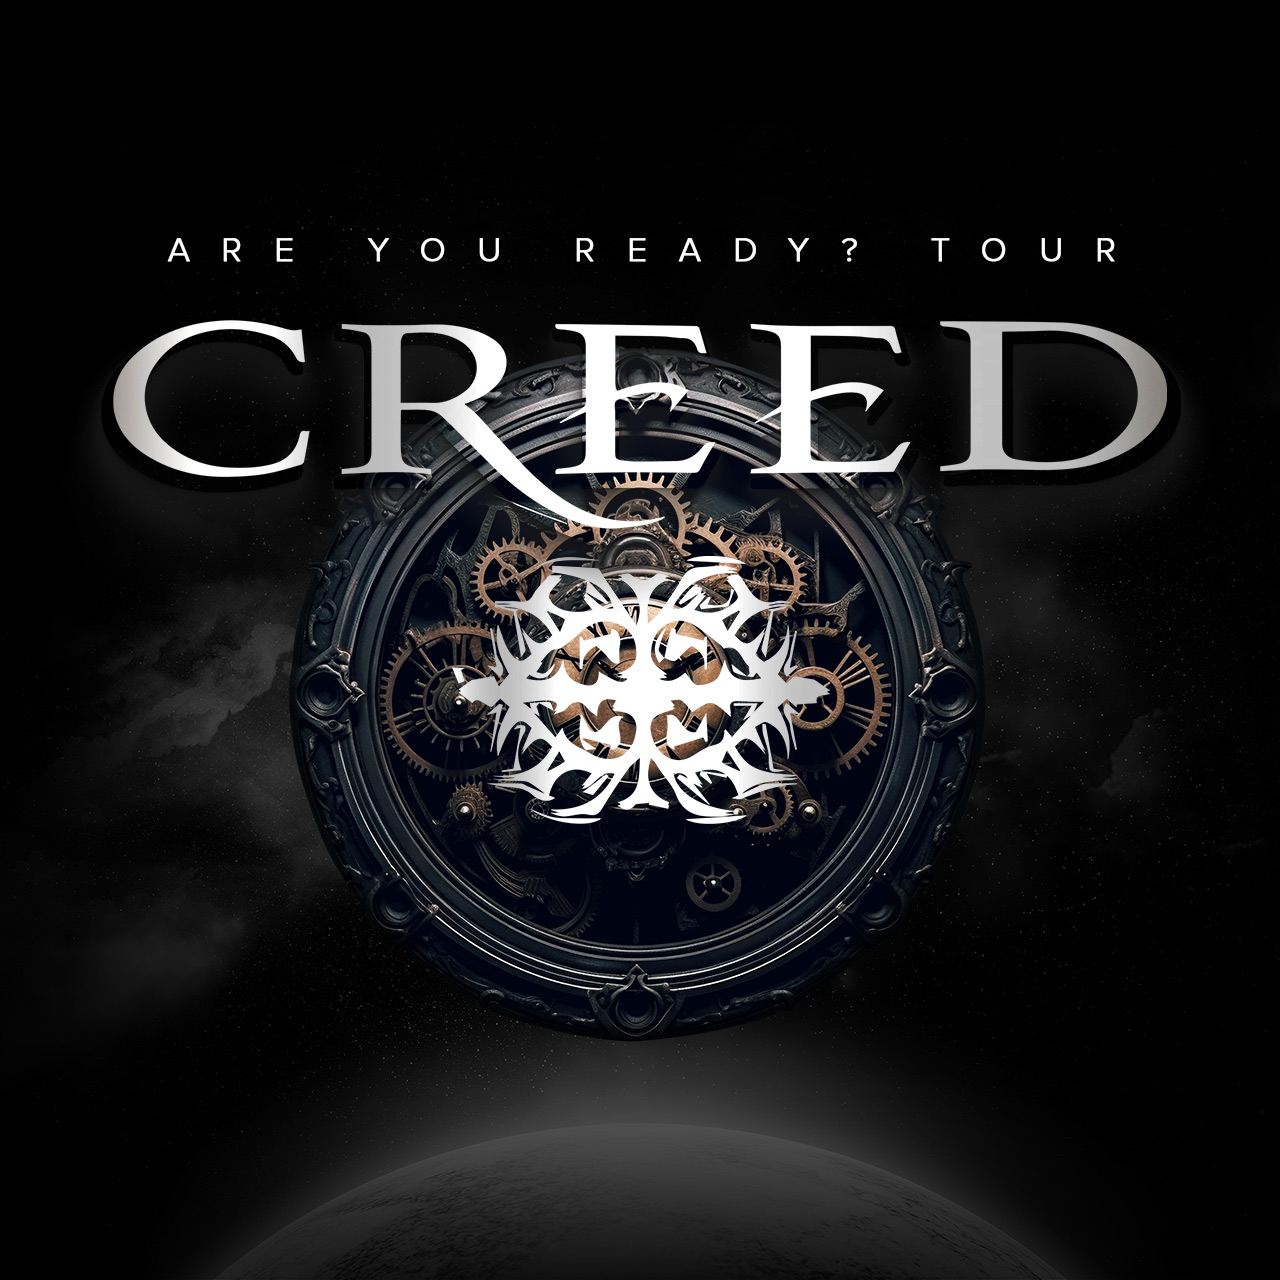 Are You Ready? Tour